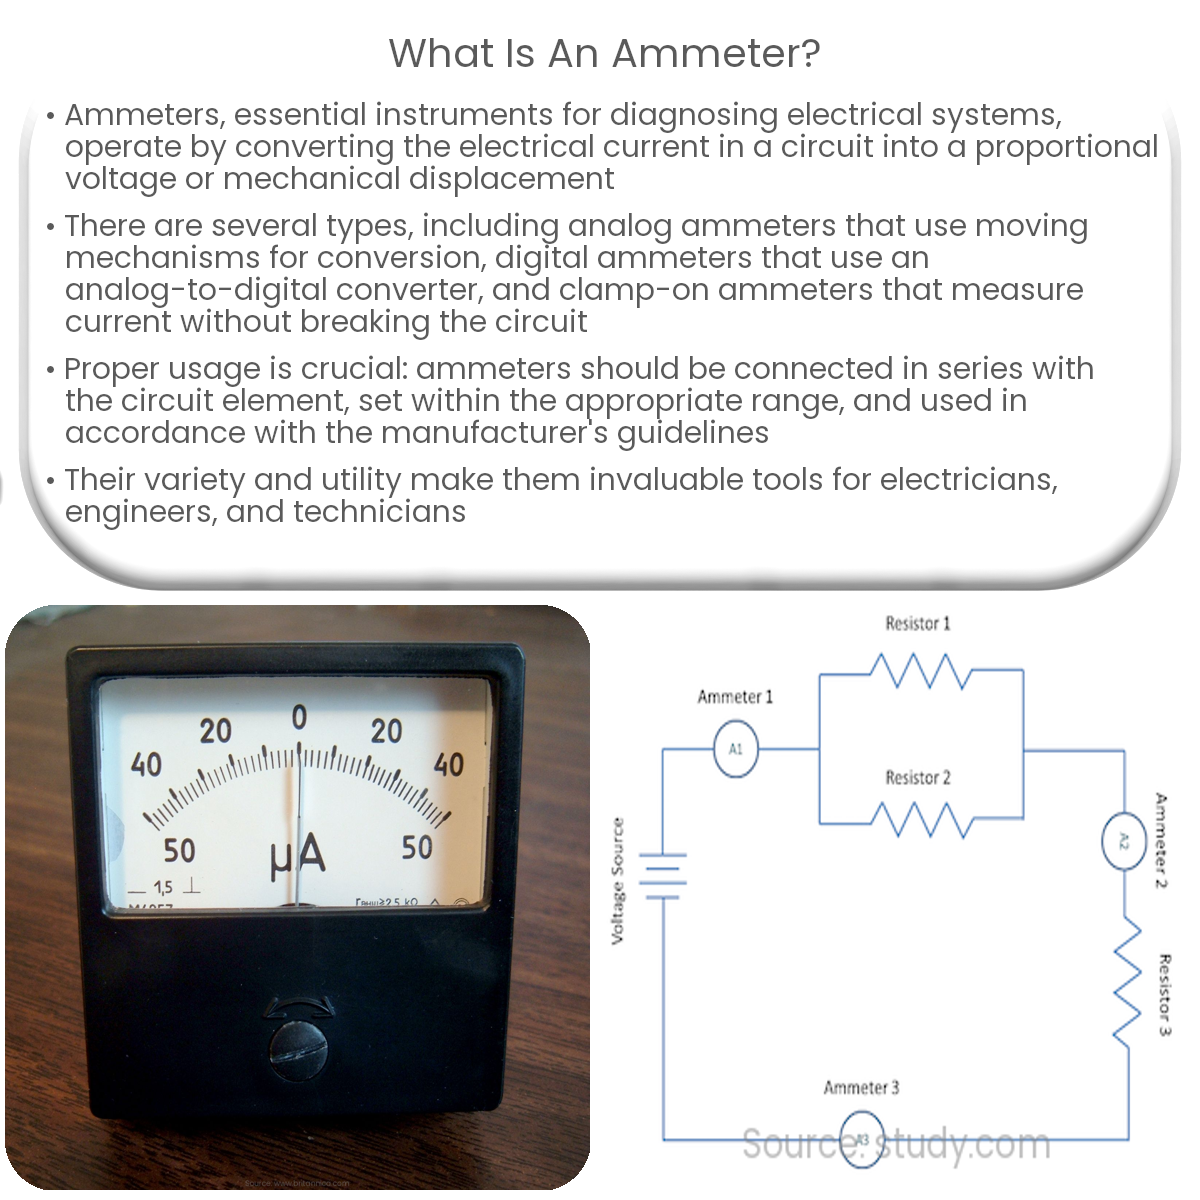 What is an ammeter?